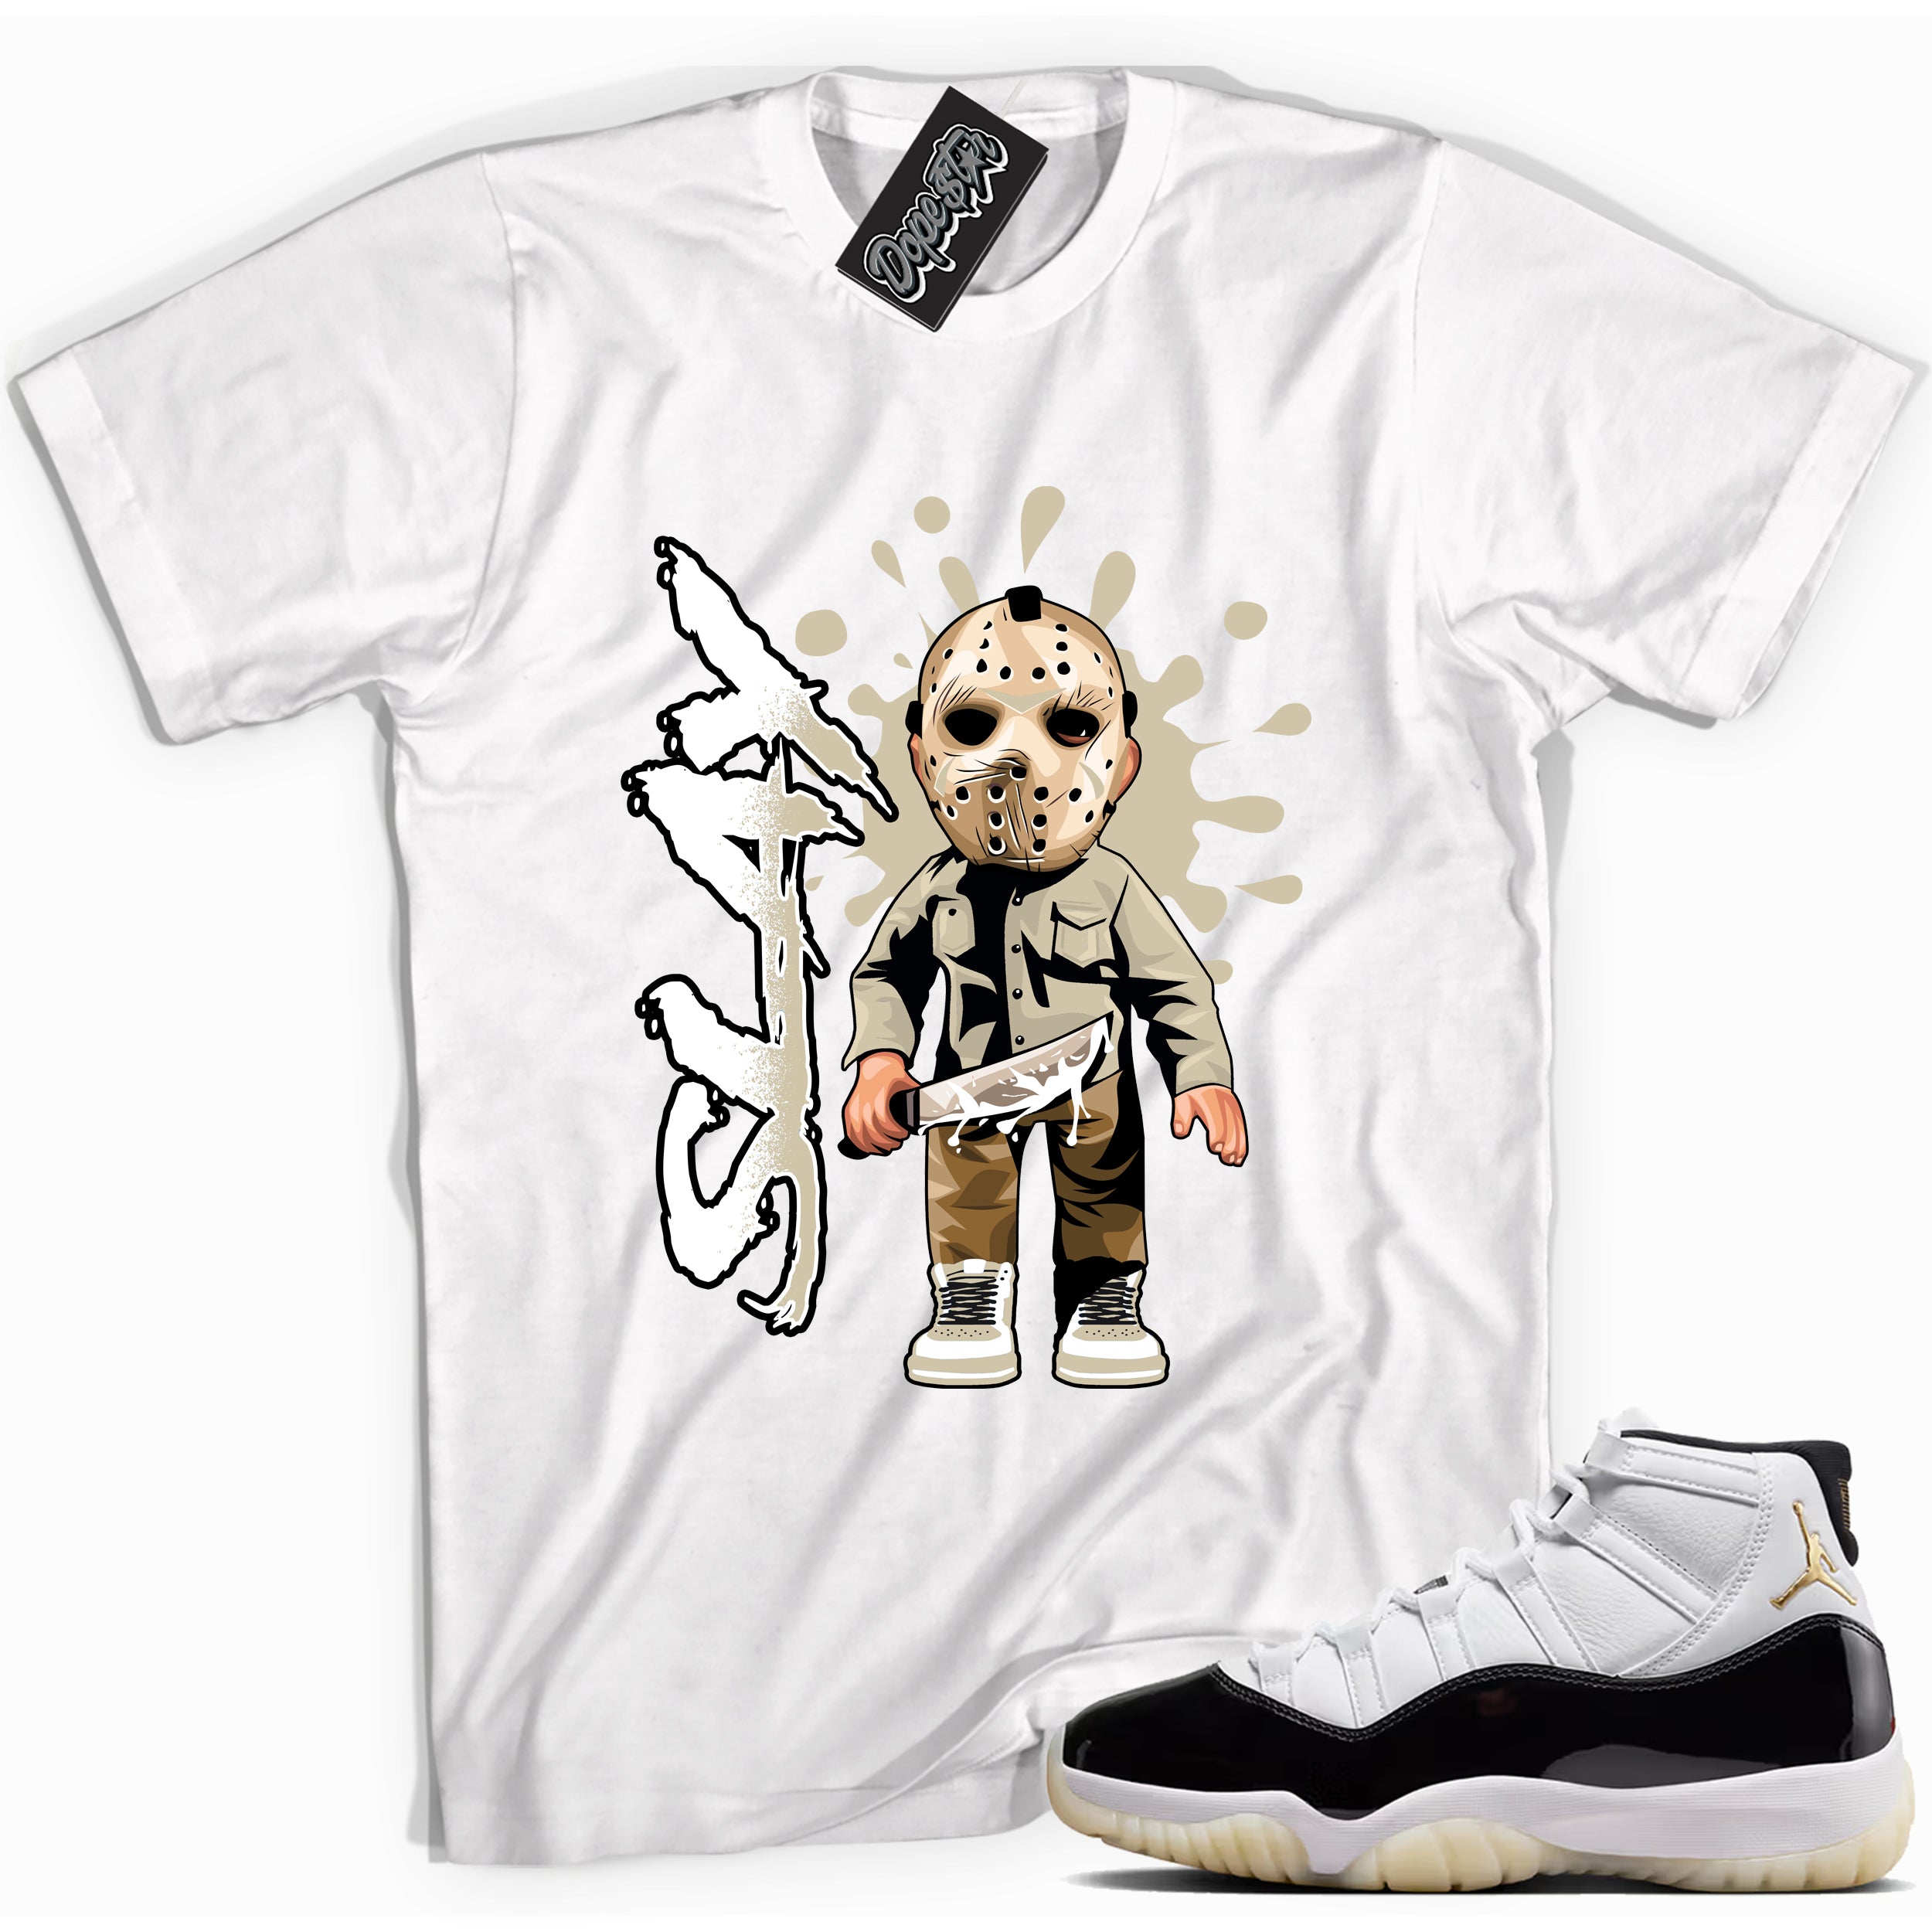 Cool White graphic tee with “ Slay ” print, that perfectly matches AIR JORDAN 11 GRATITUDE   sneakers 